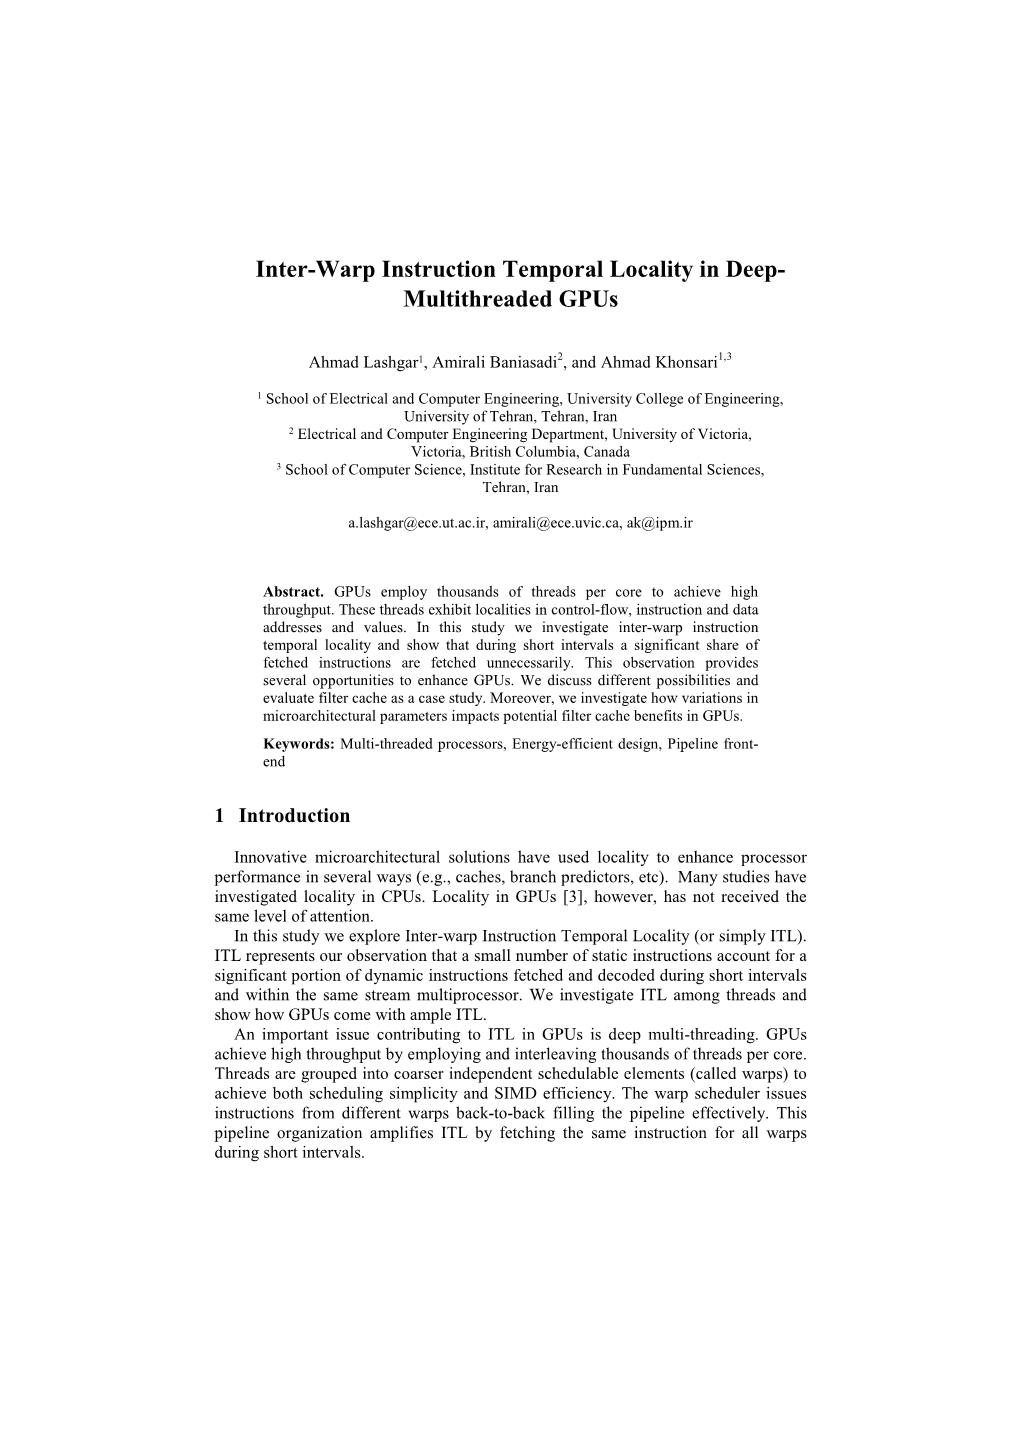 Inter-Warp Instruction Temporal Locality in Deep- Multithreaded Gpus